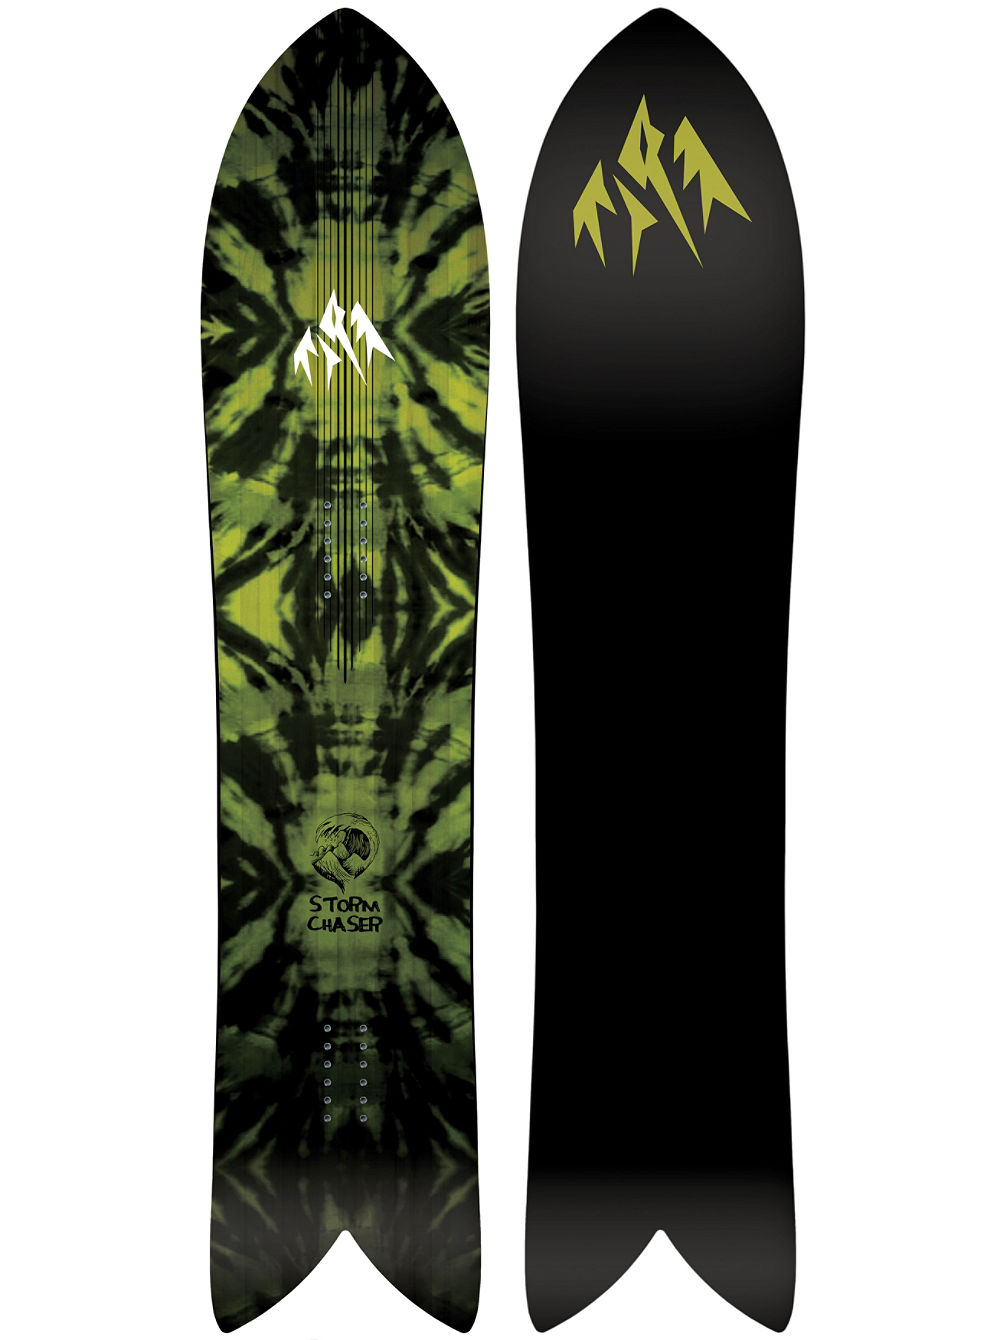 Storm Chaser 157 2019 Snowboard